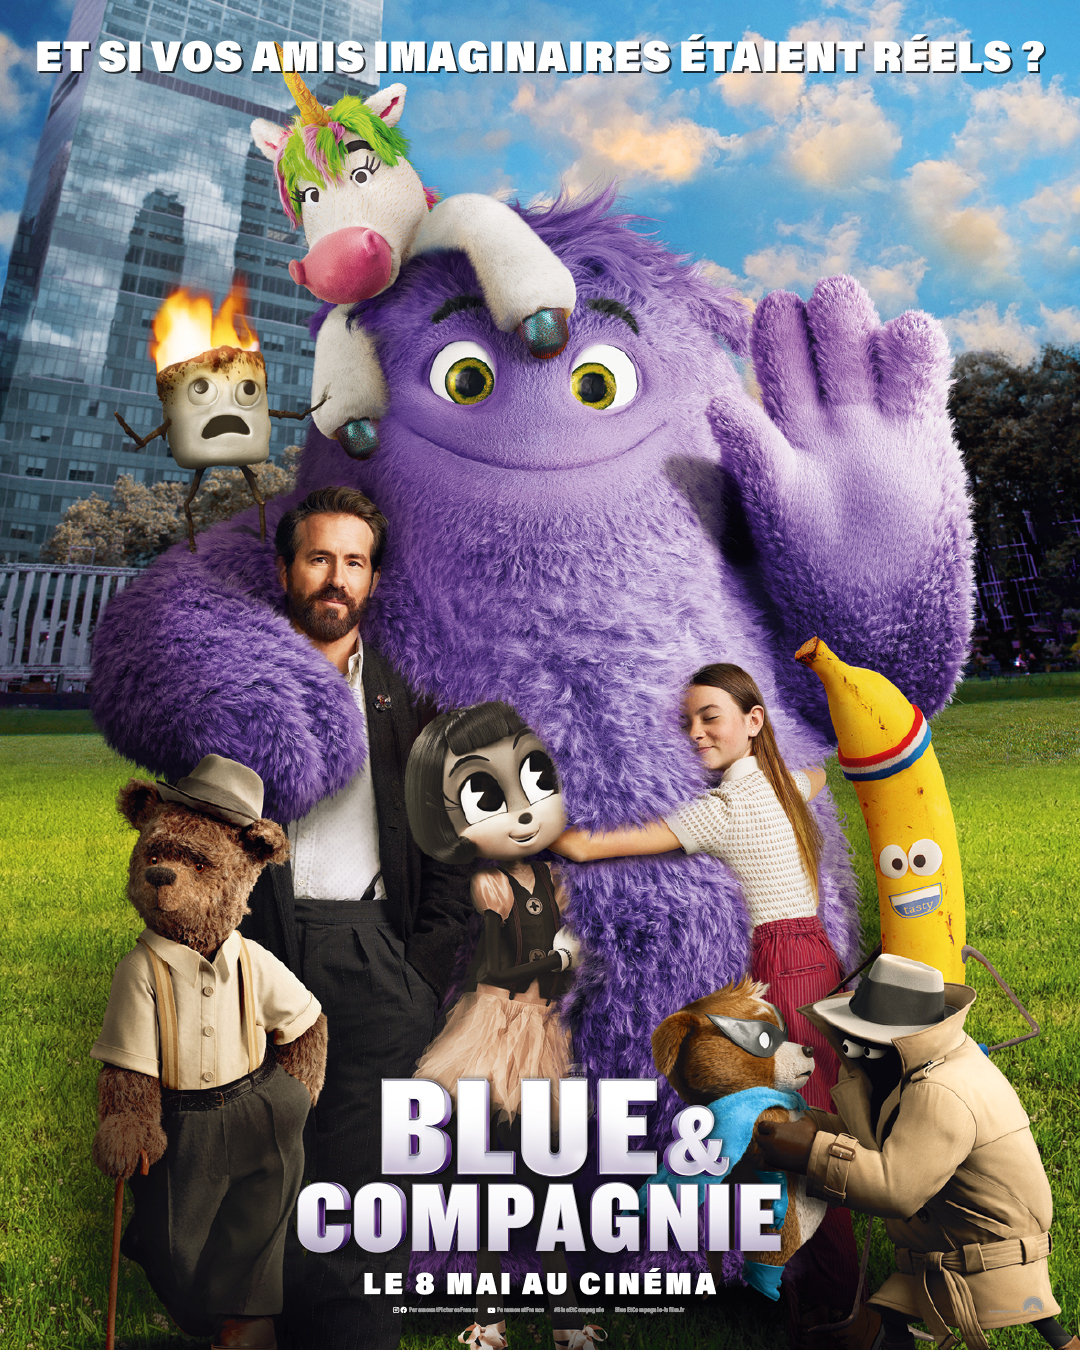 BLUE & COMPAGNIE - Paramount Pictures France